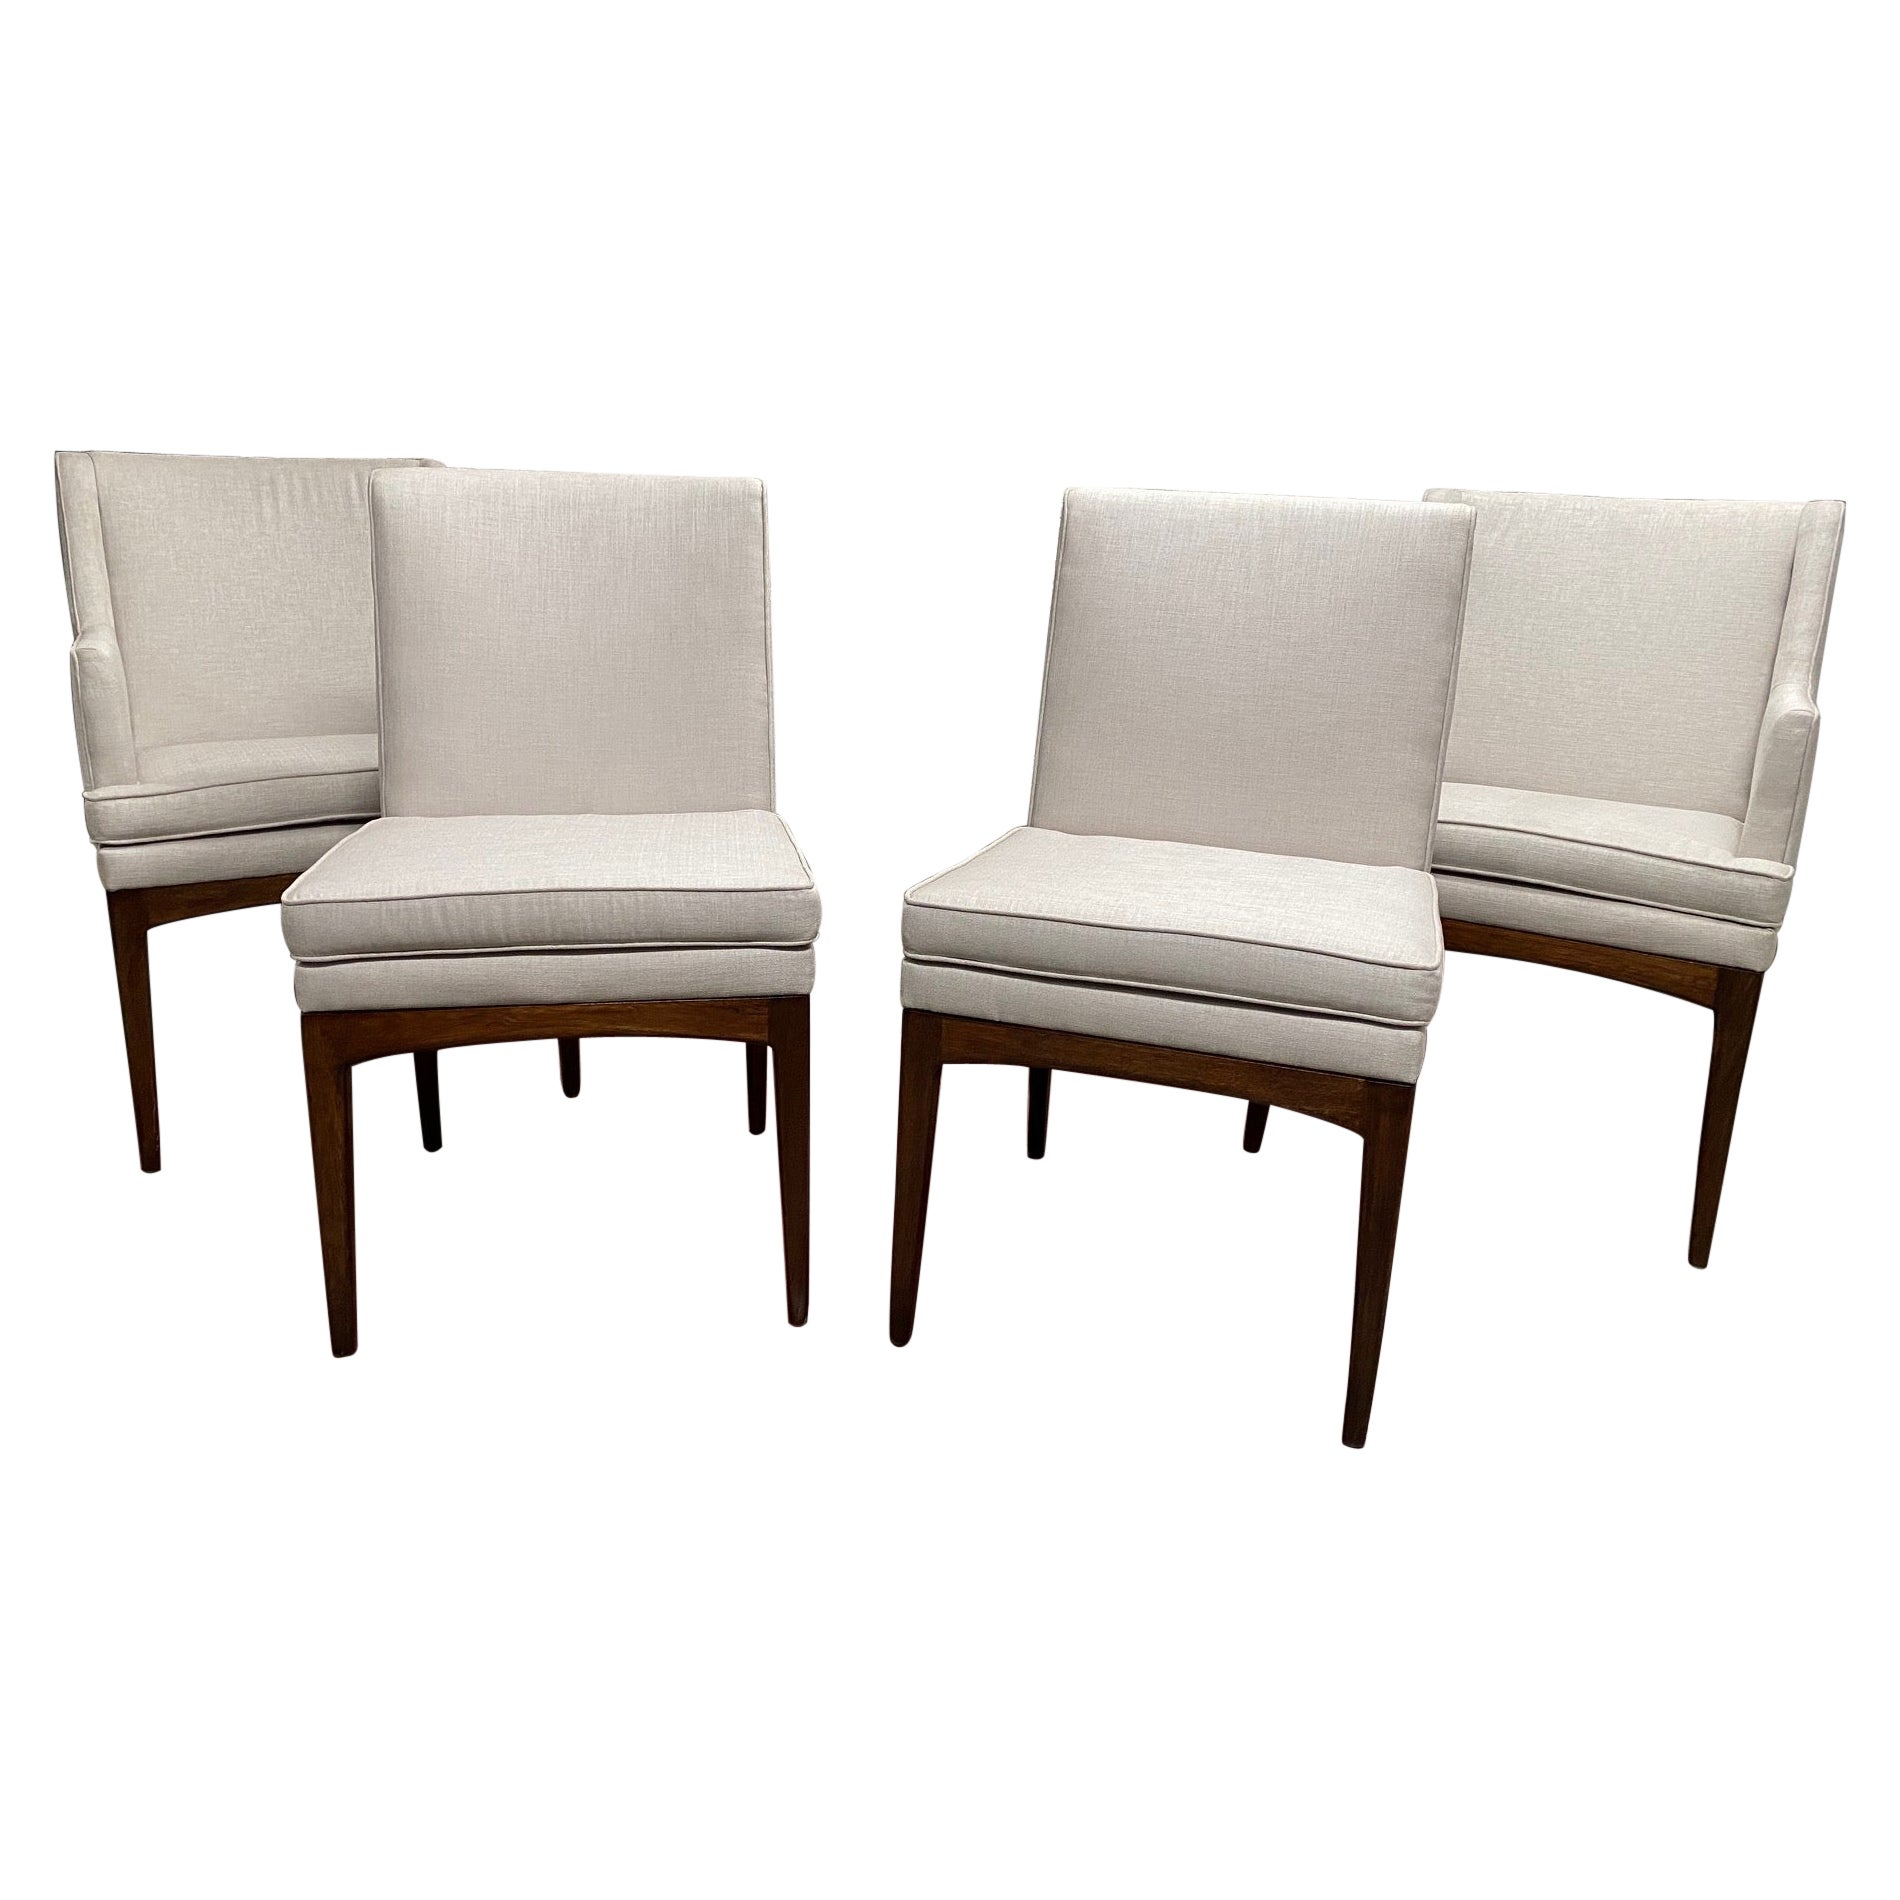  Set of Four Modernist Walnut and Upholstered Dining Chairs by Flair Furniture For Sale